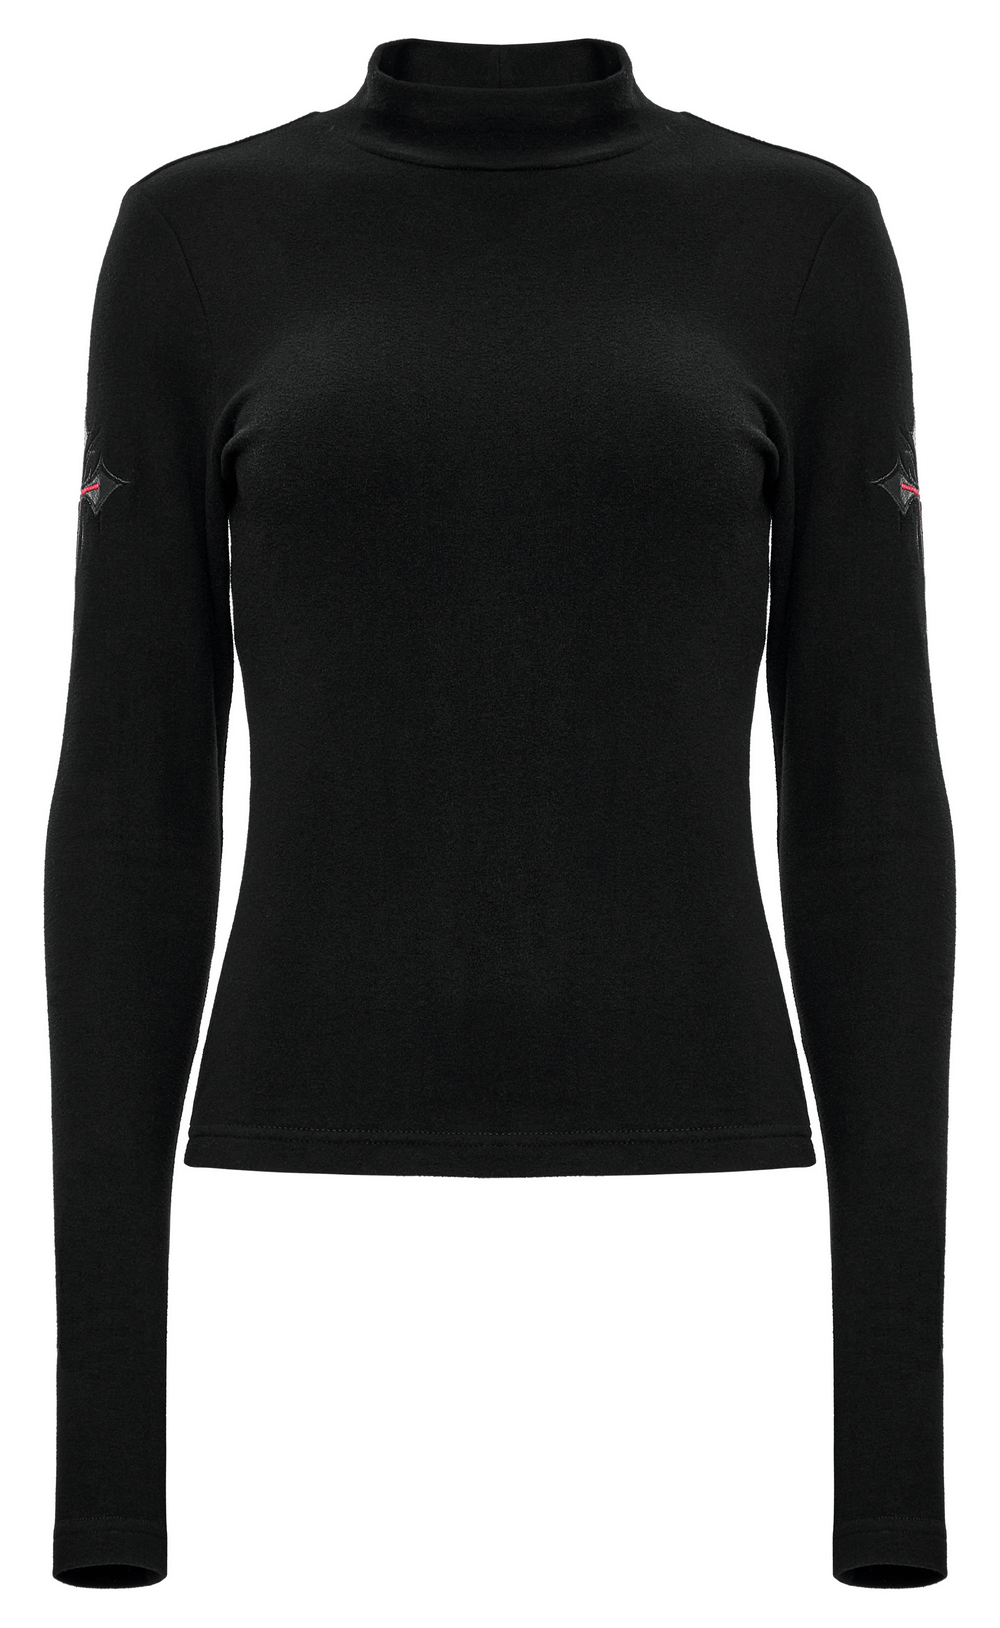 Black Turtleneck Top with Gothic Cross Appliques